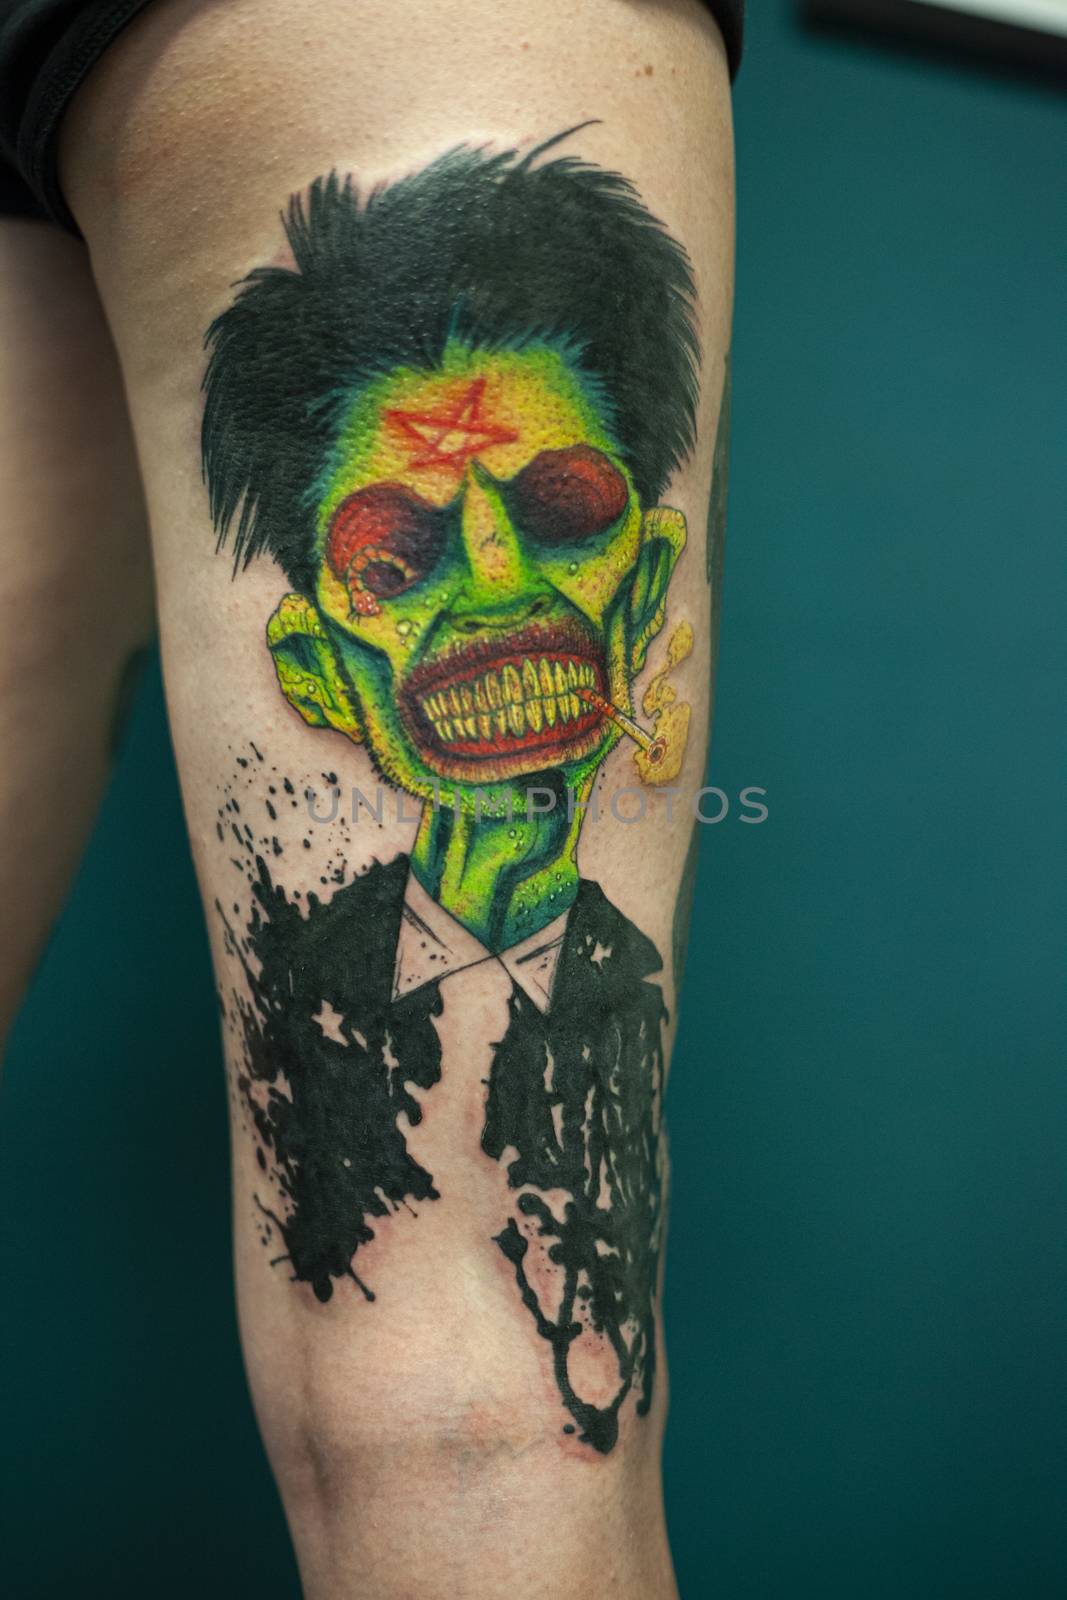 Coloured Tattoo with green face painted in a leg